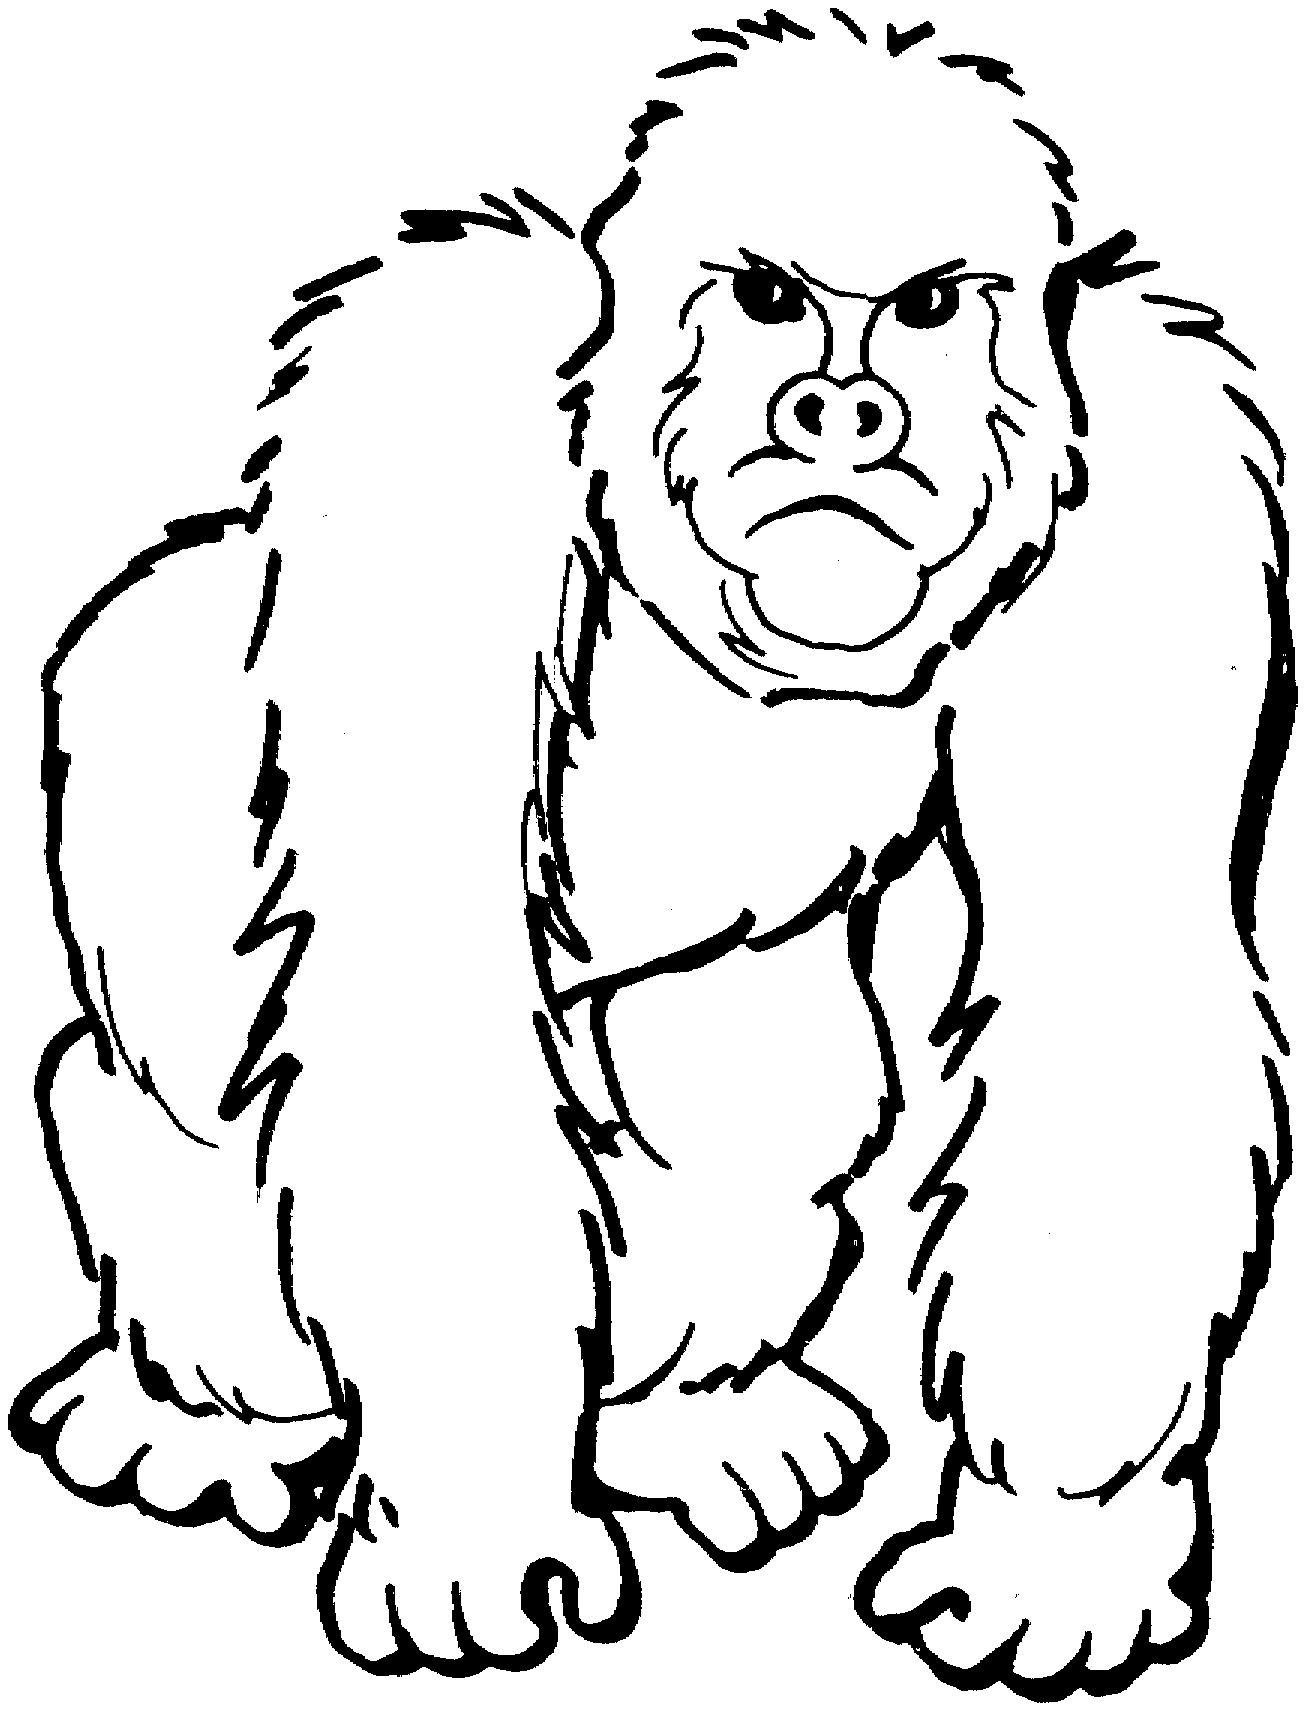 Free Ape Clipart Black And White, Download Free Clip Art